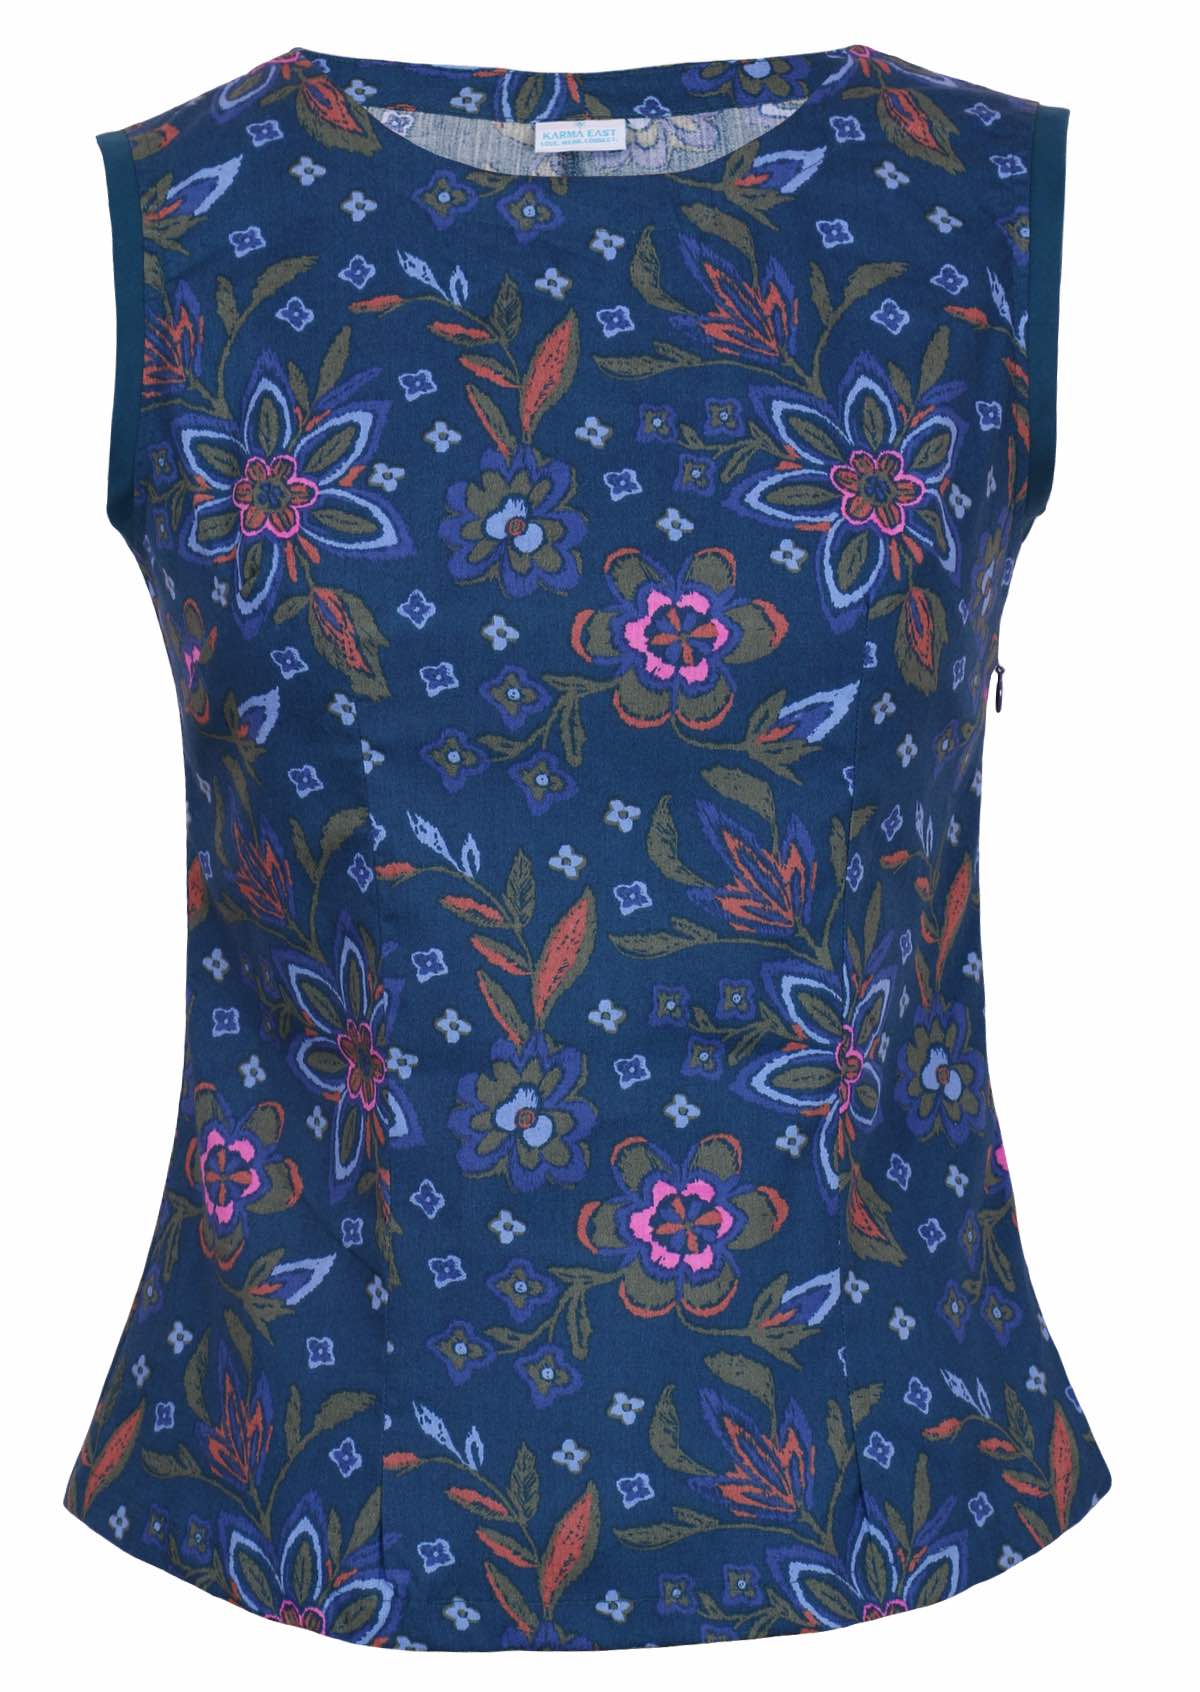 Round neck cotton top has a floral pattern. 